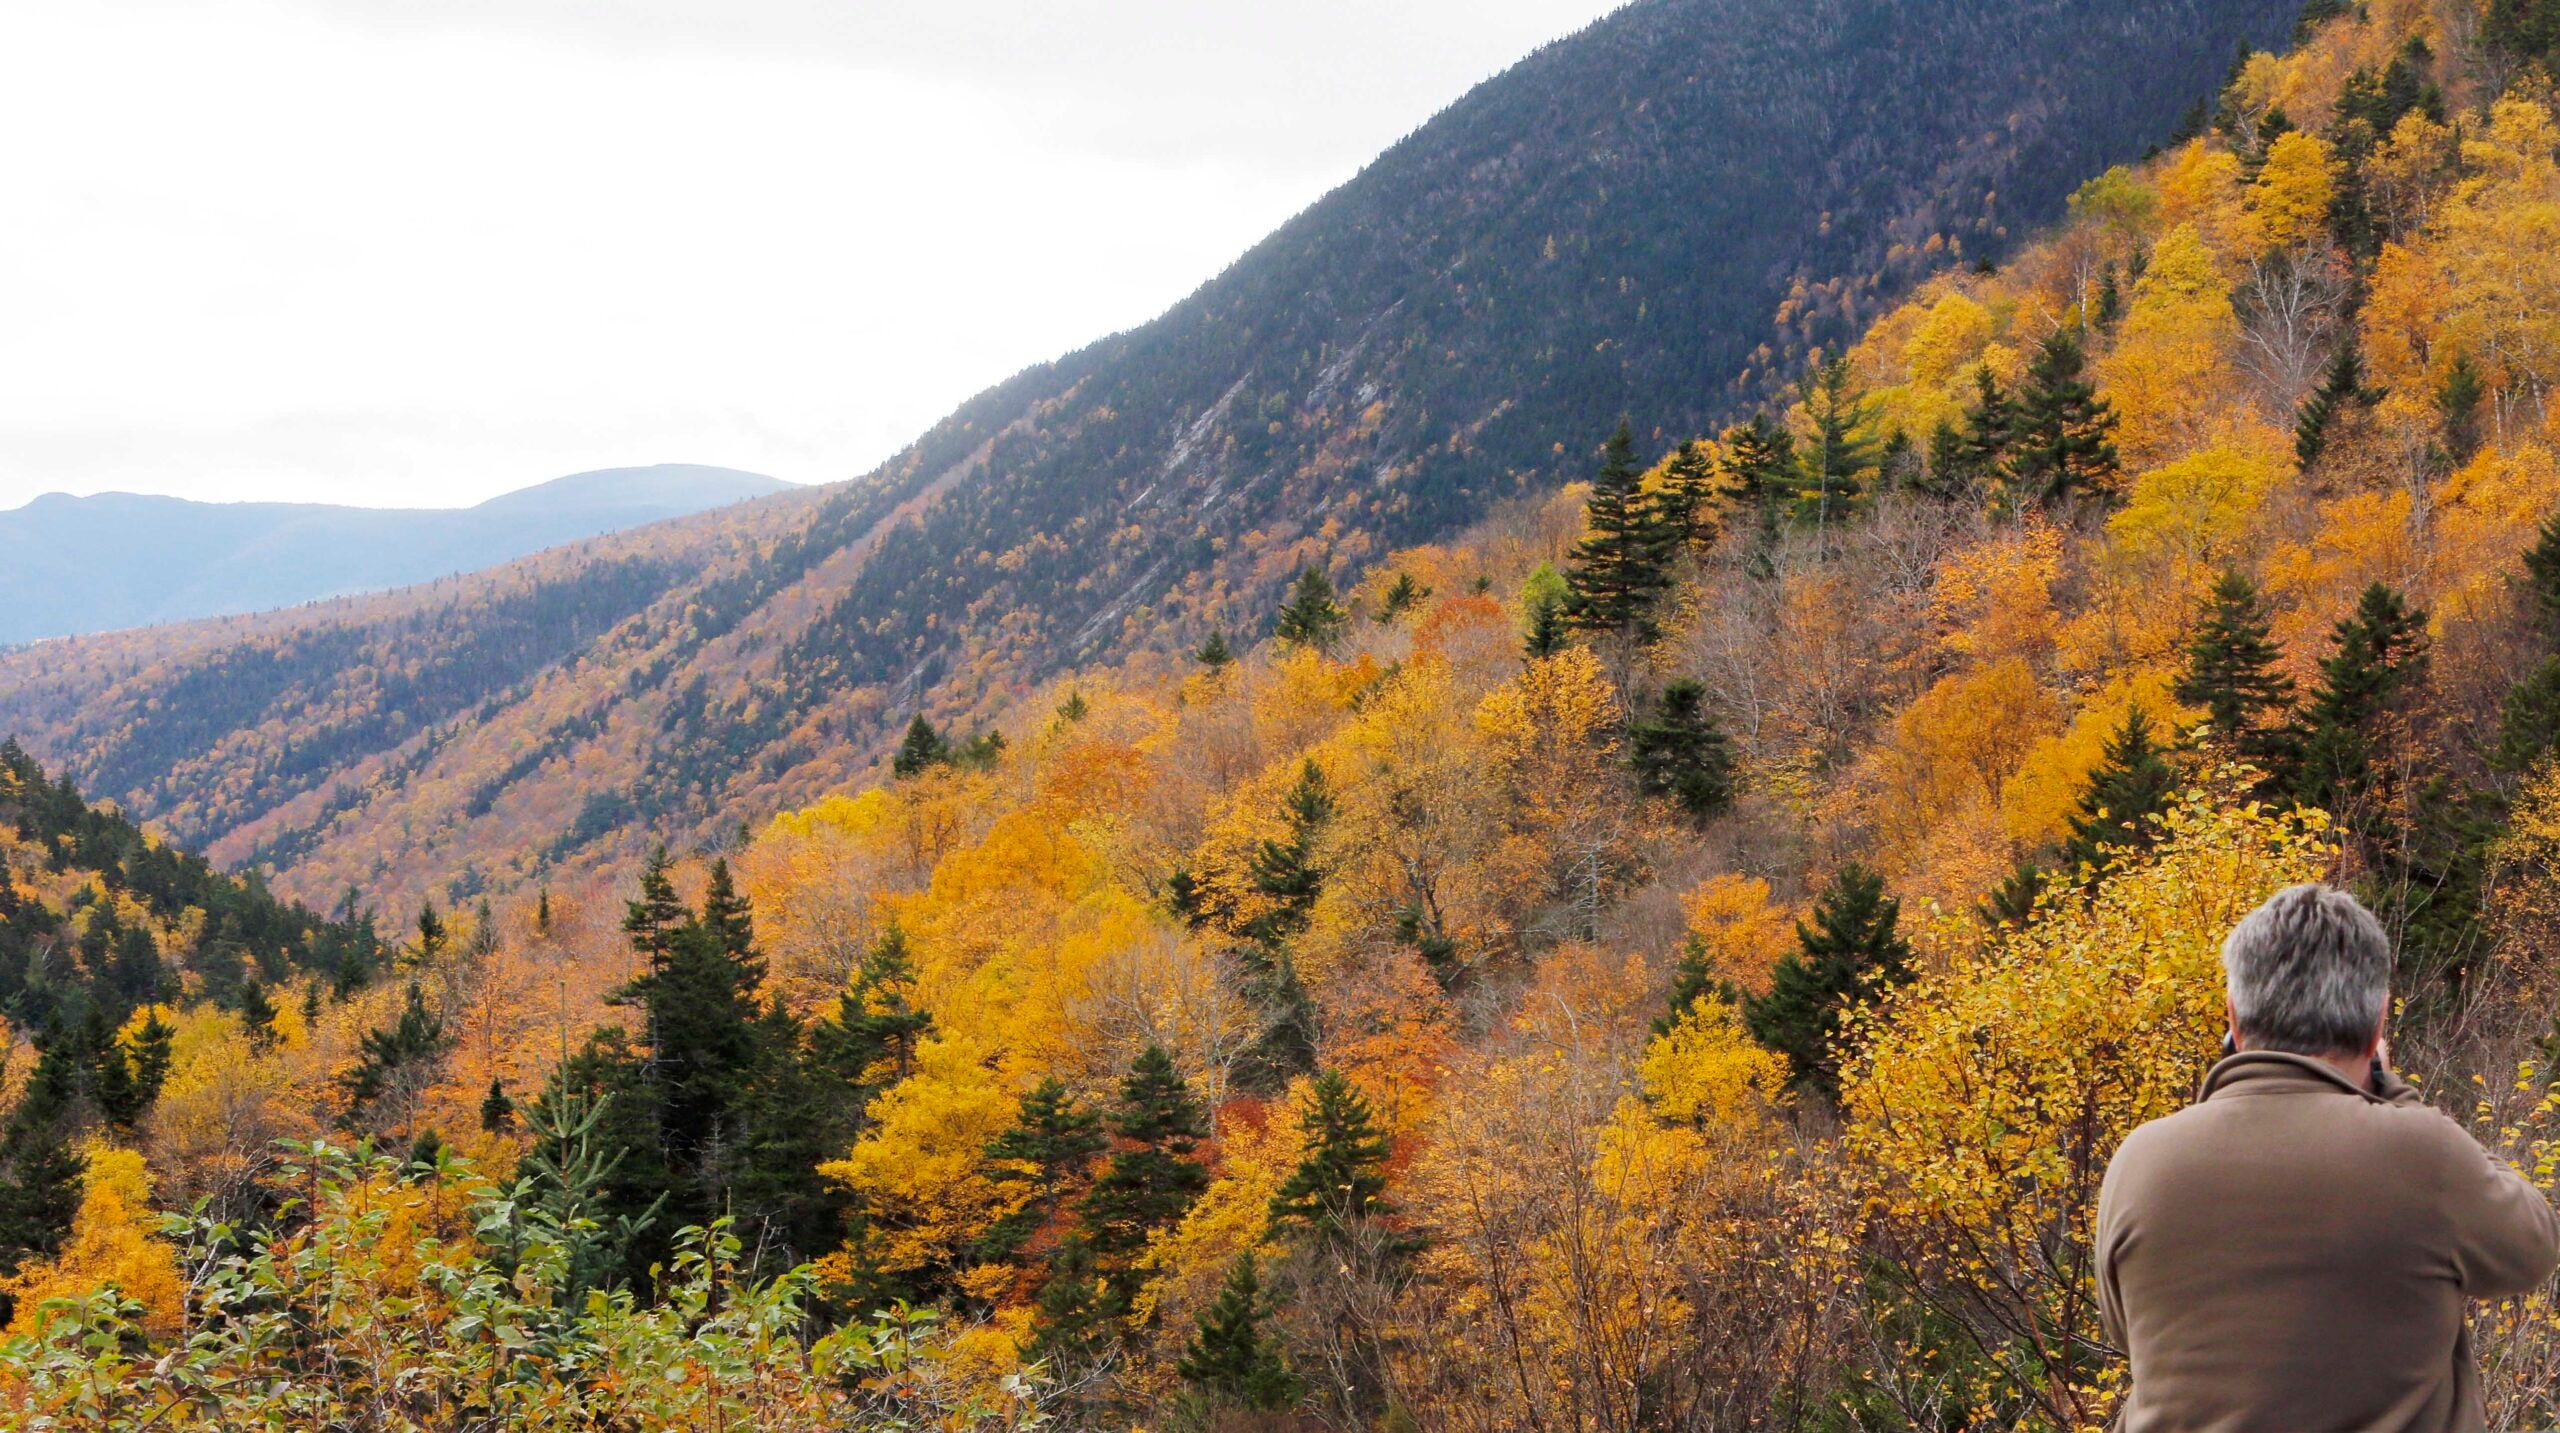 Here's a fall foliage map for all your New England leaf peeping adventures